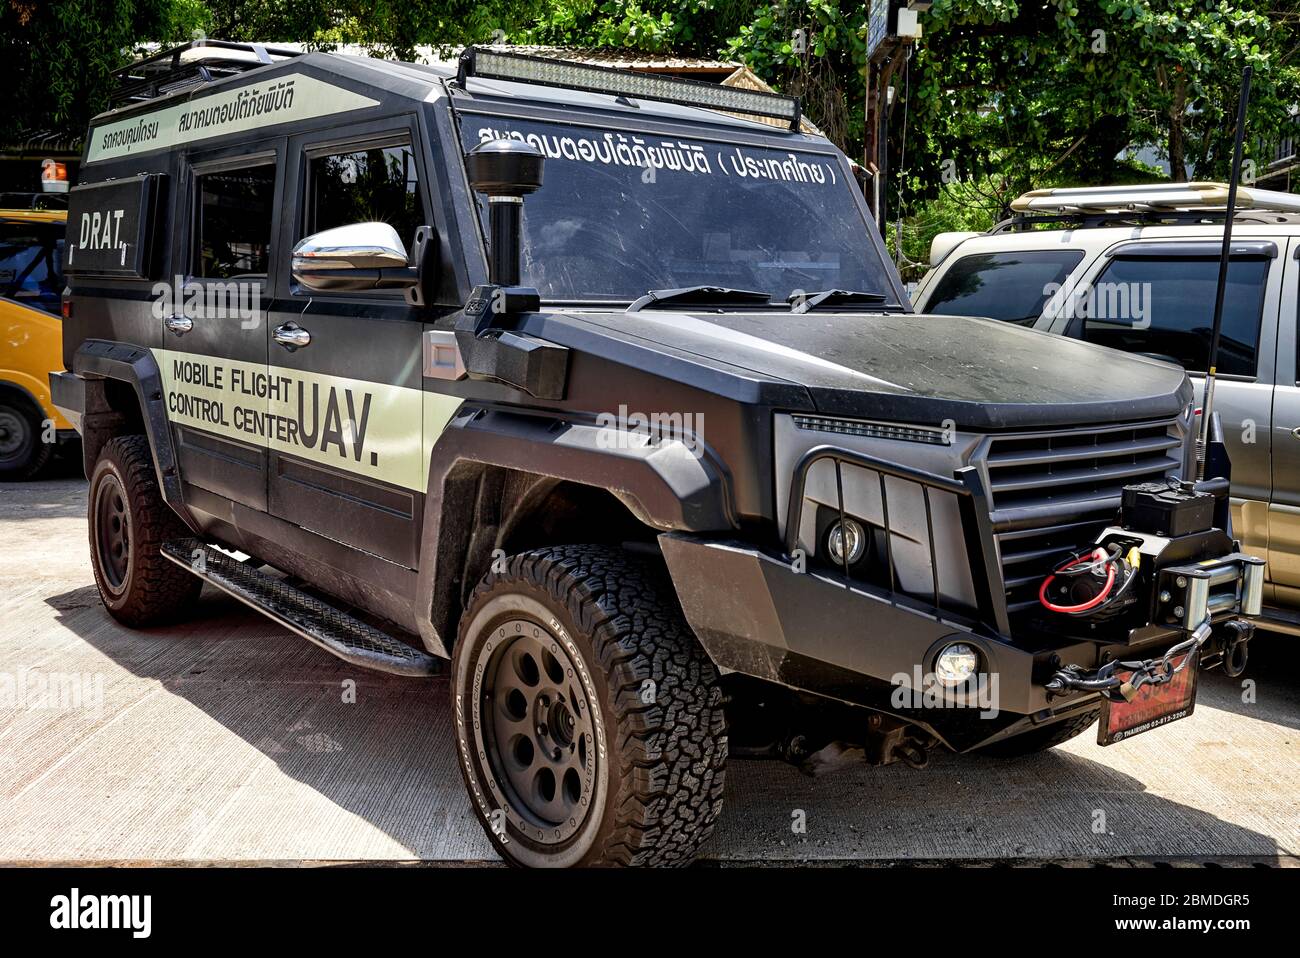 D.R.A.T (disaster response associations Thailand) team vehicle and mobile flight control center. Thailand Southeast Asia Stock Photo